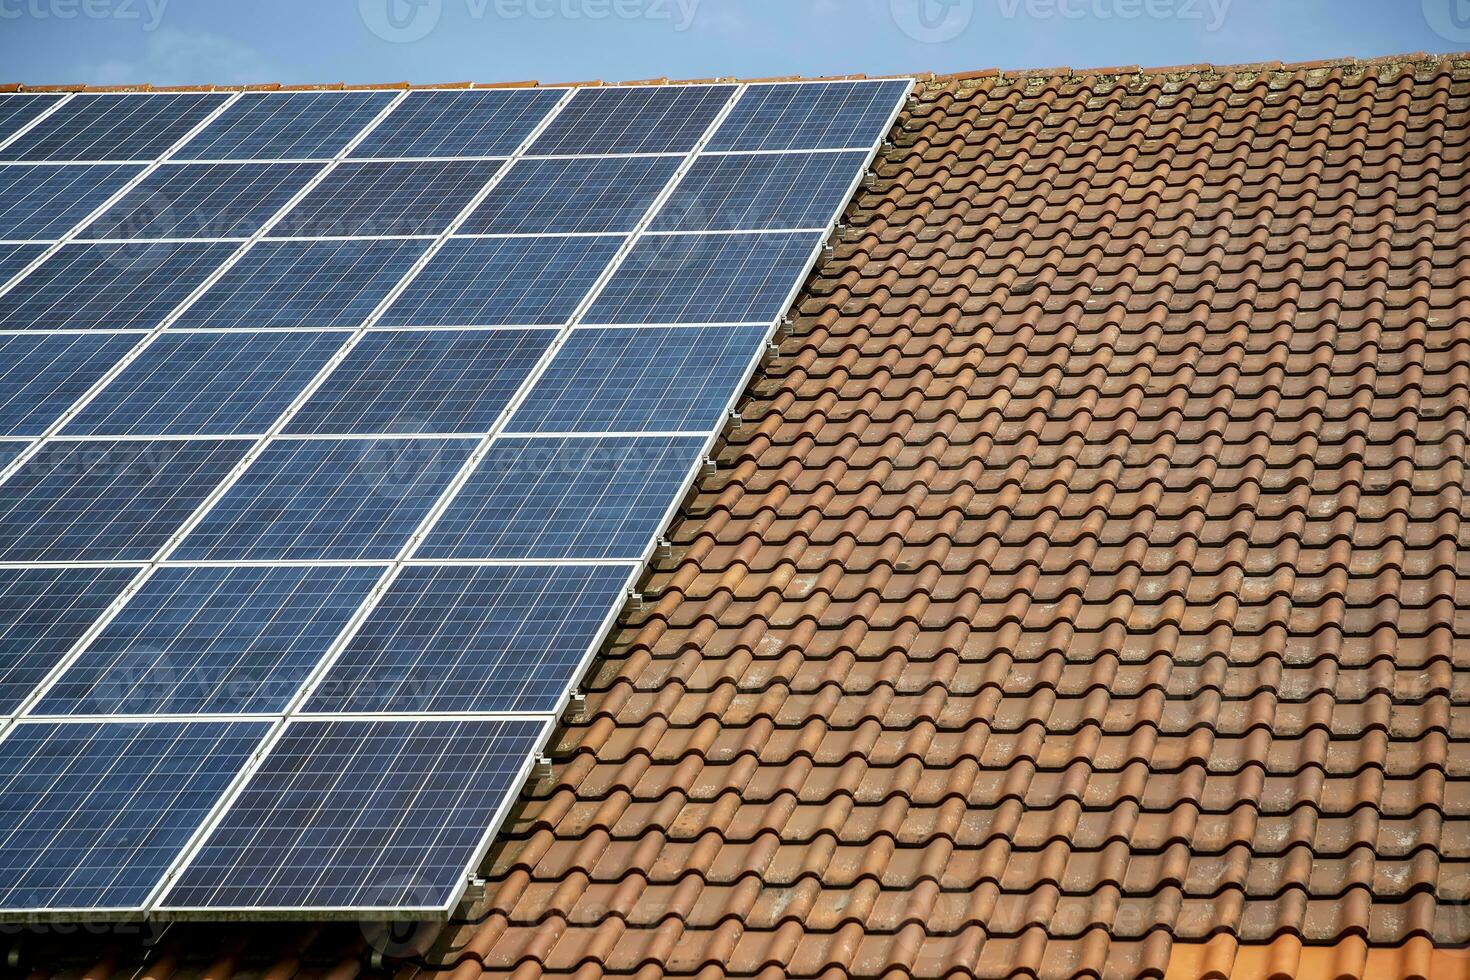 solar panels on roof of house. horizontal orientation, blue sky, gray panels on brown roof. photo